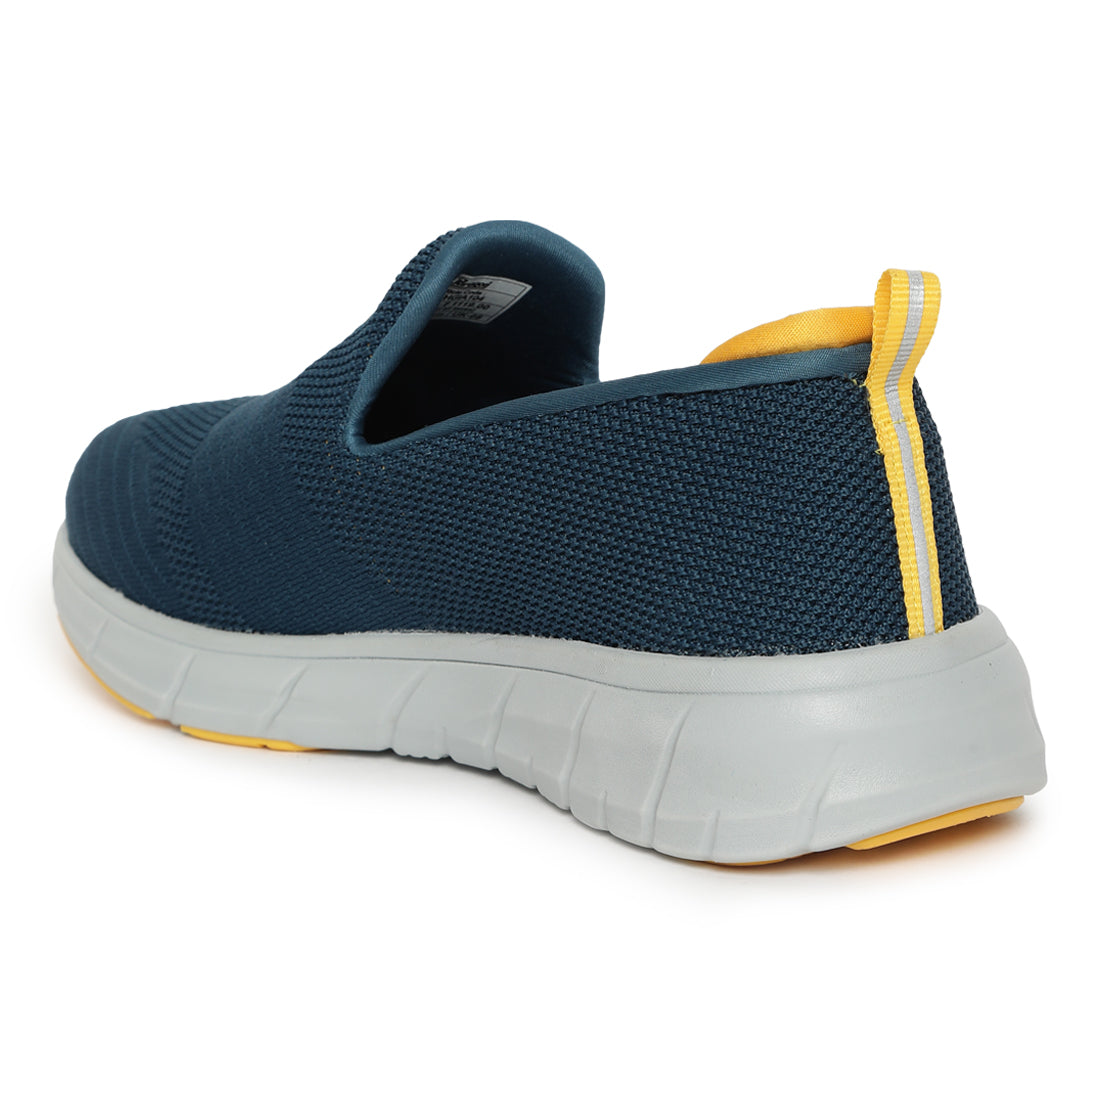 Eeken Teal Blue - Yellow Athleisure Shoes for Men